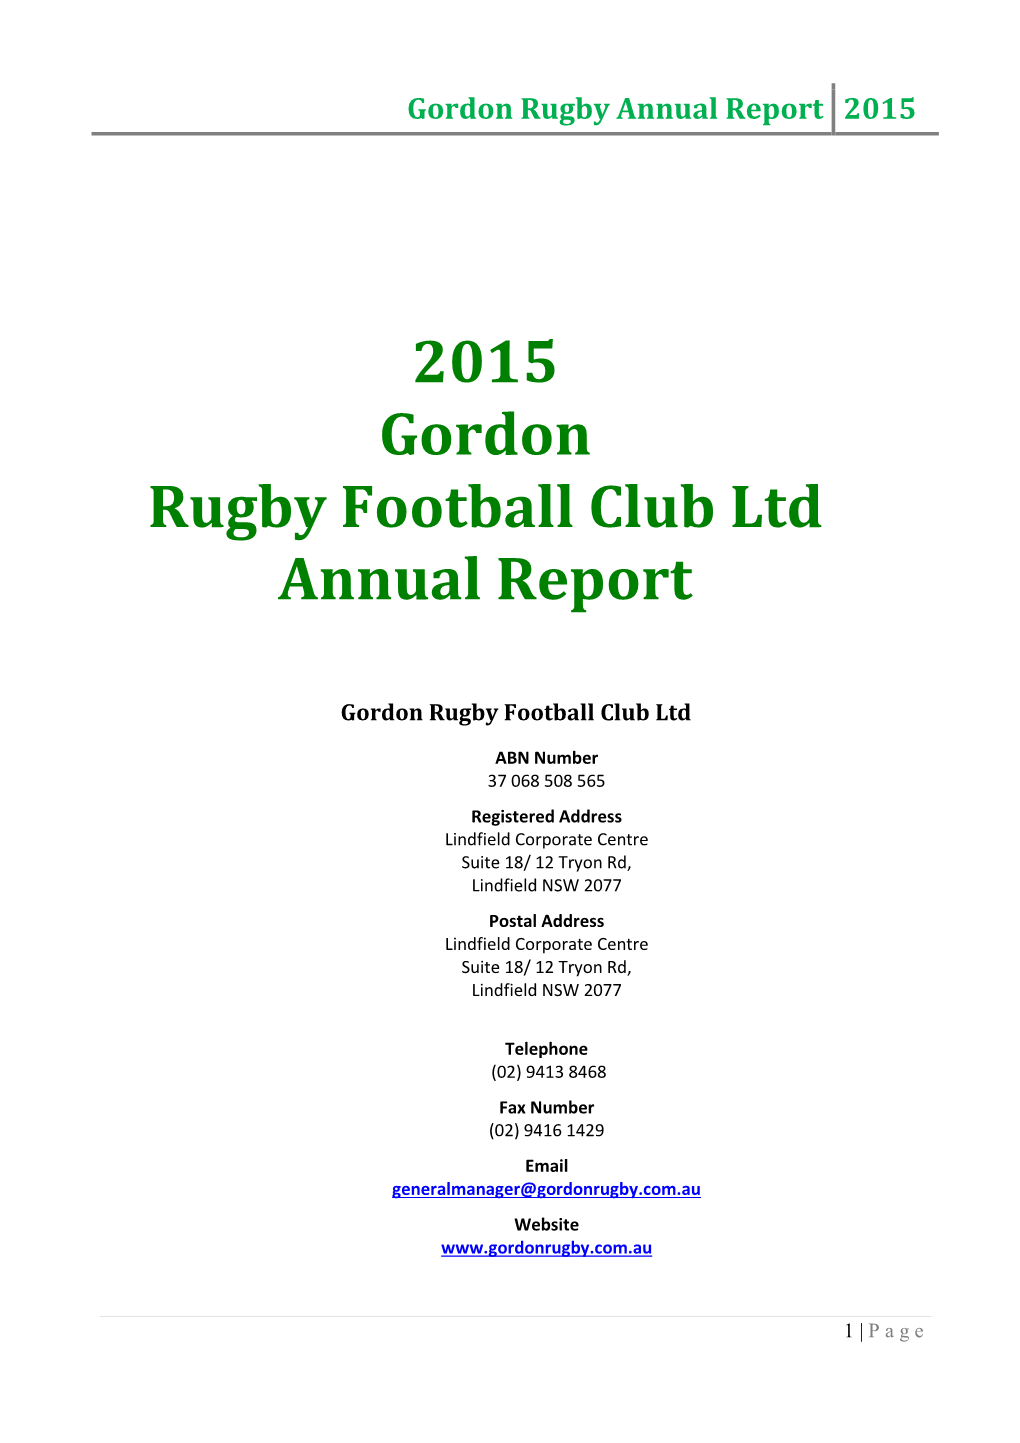 Gordon Rugby Annual Report 2015